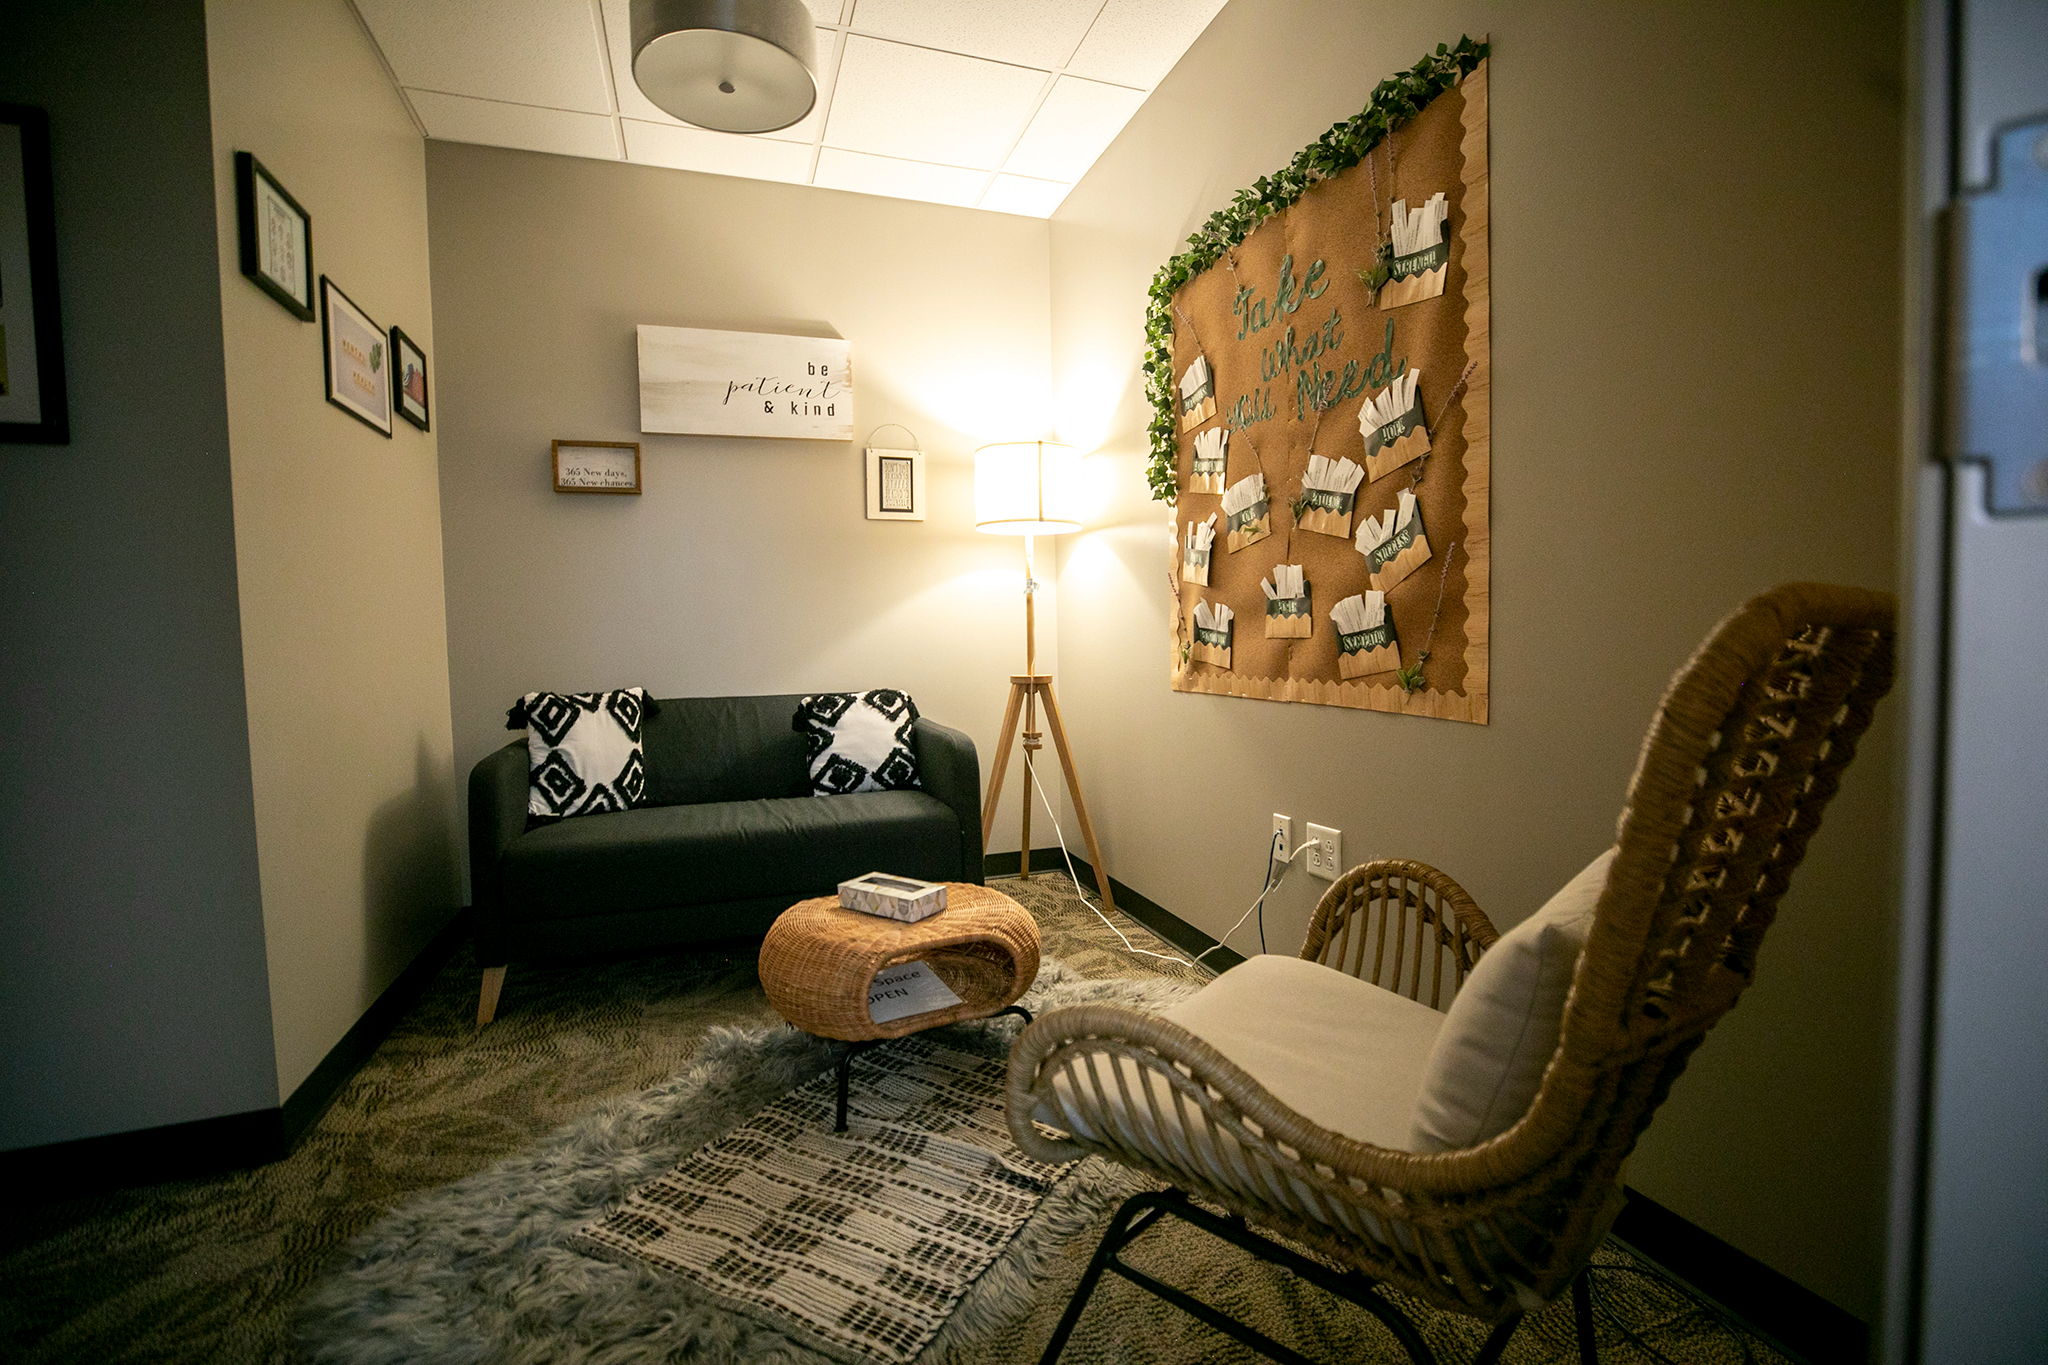 A therapy room at the Center on Colfax.